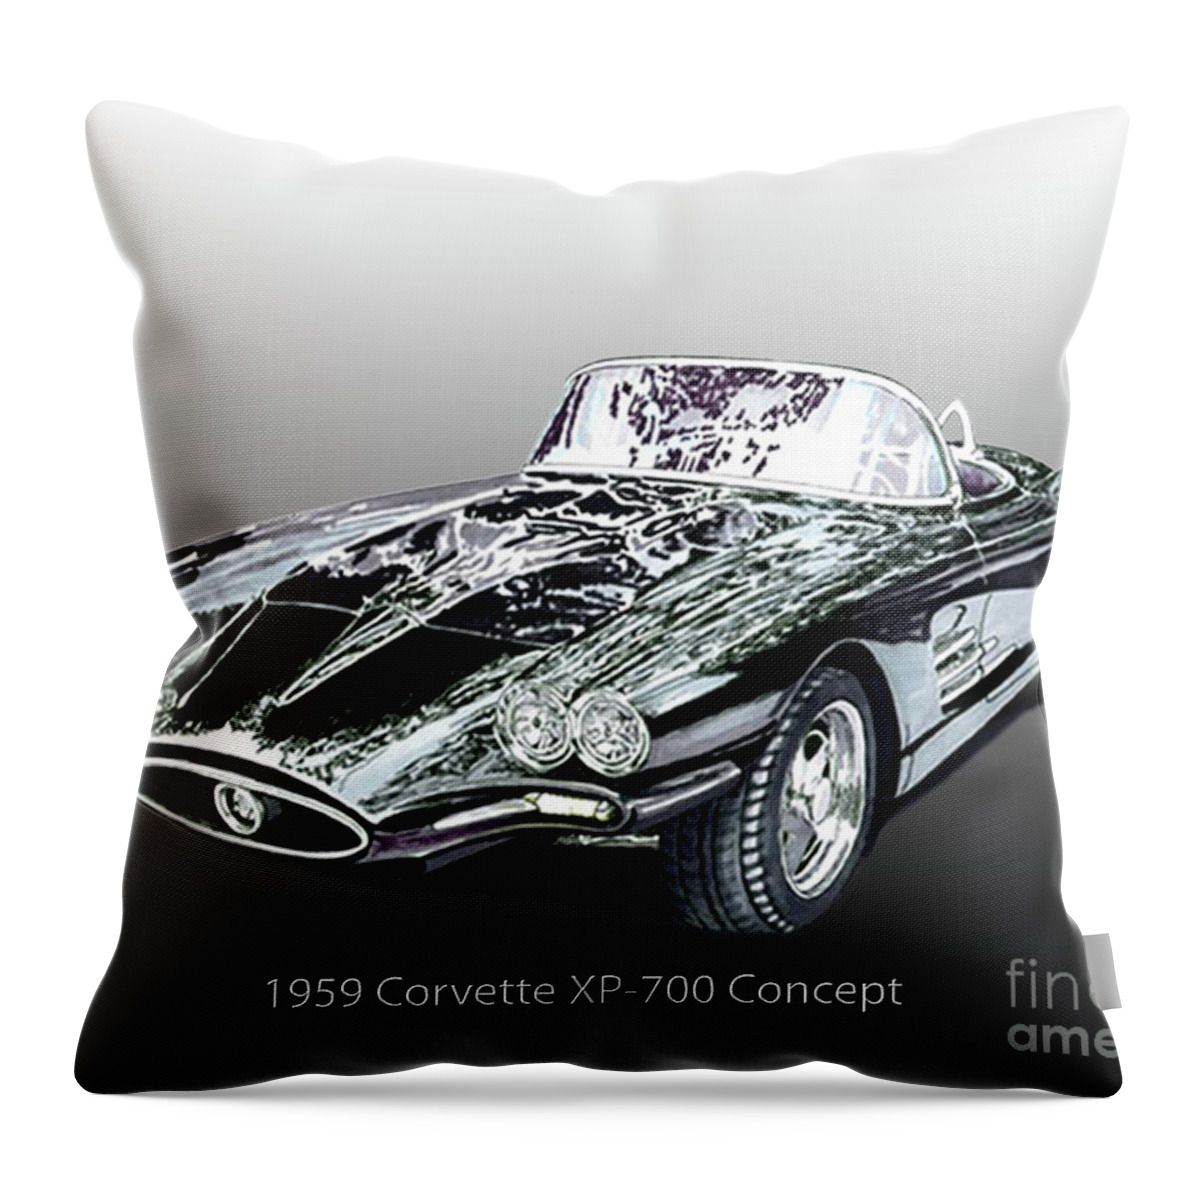 Survived Being Crushed Throw Pillow featuring the painting 1959 Corvette X P 700 Concept by Jack Pumphrey